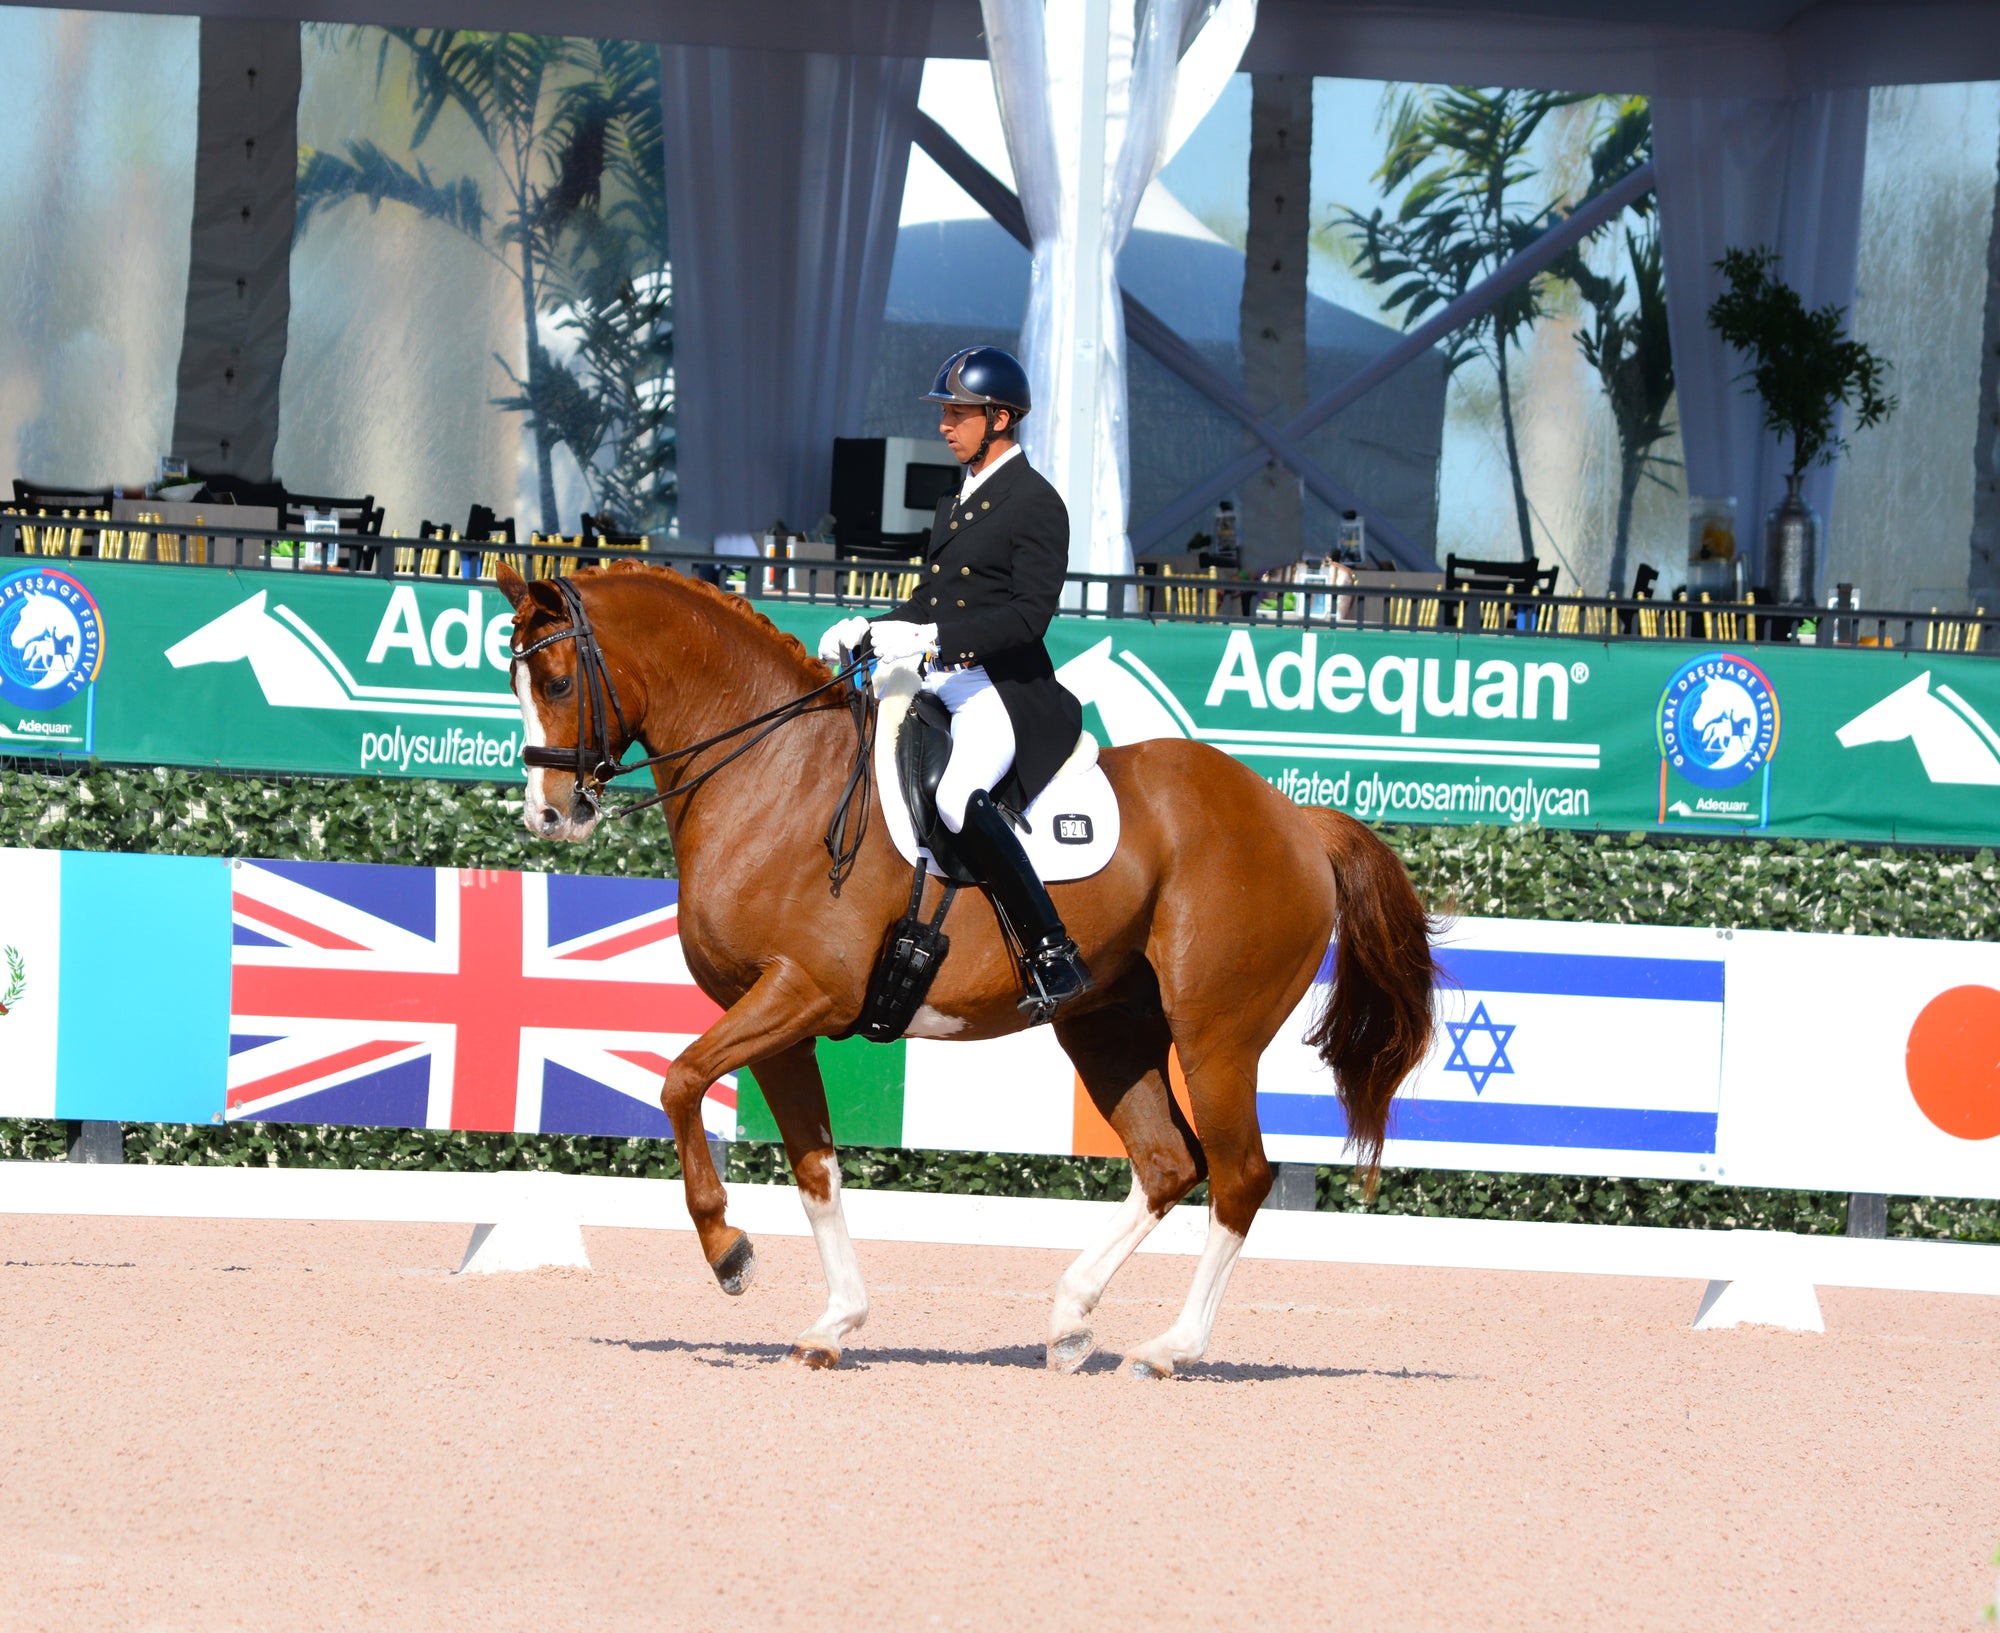 Man competing in dressage with chestnut horse